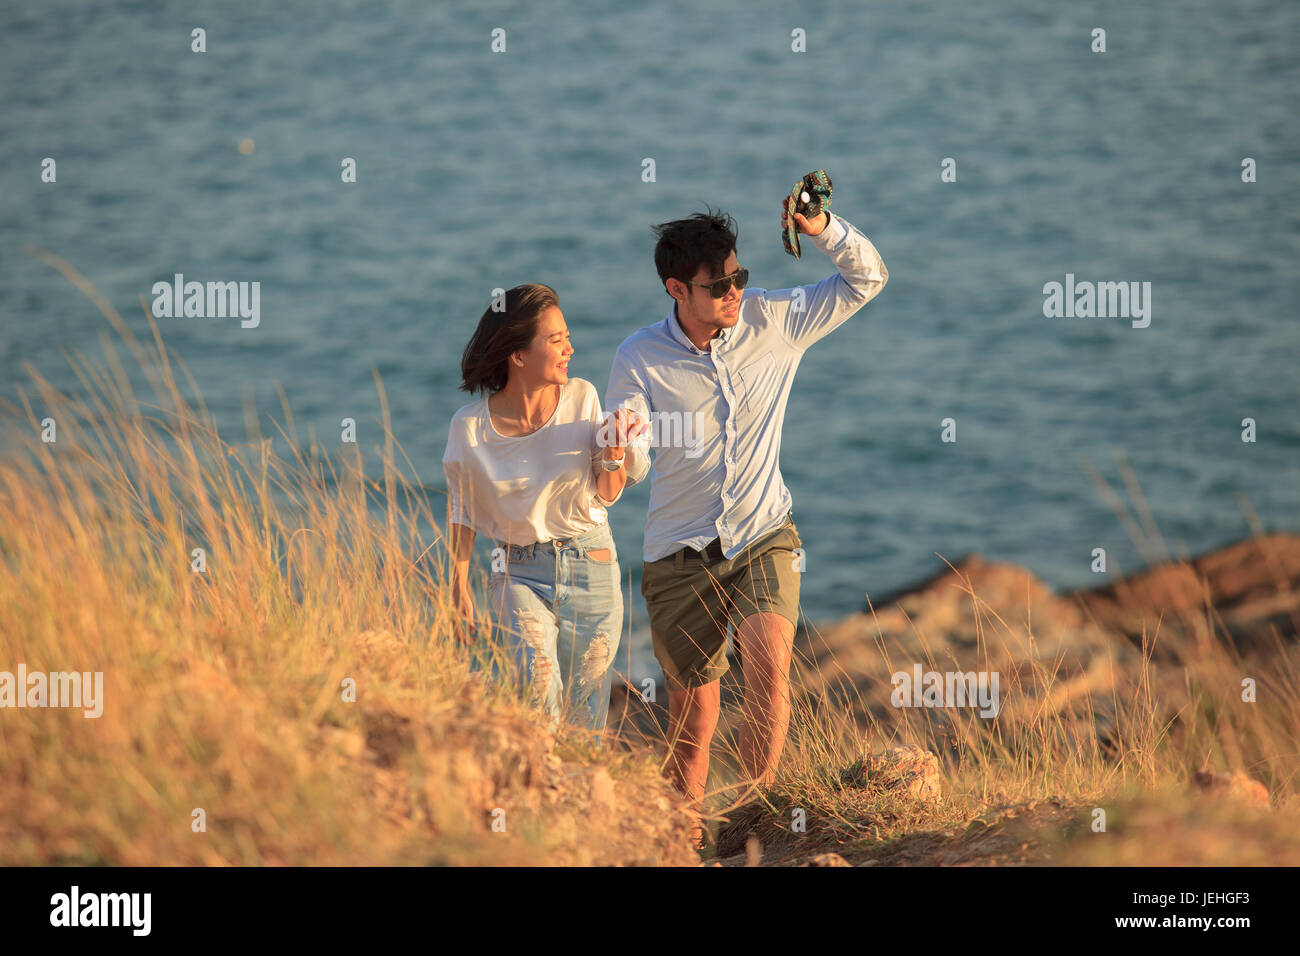 couples of younger man and woman in love relaxing vacation outdoor lifestyle Stock Photo